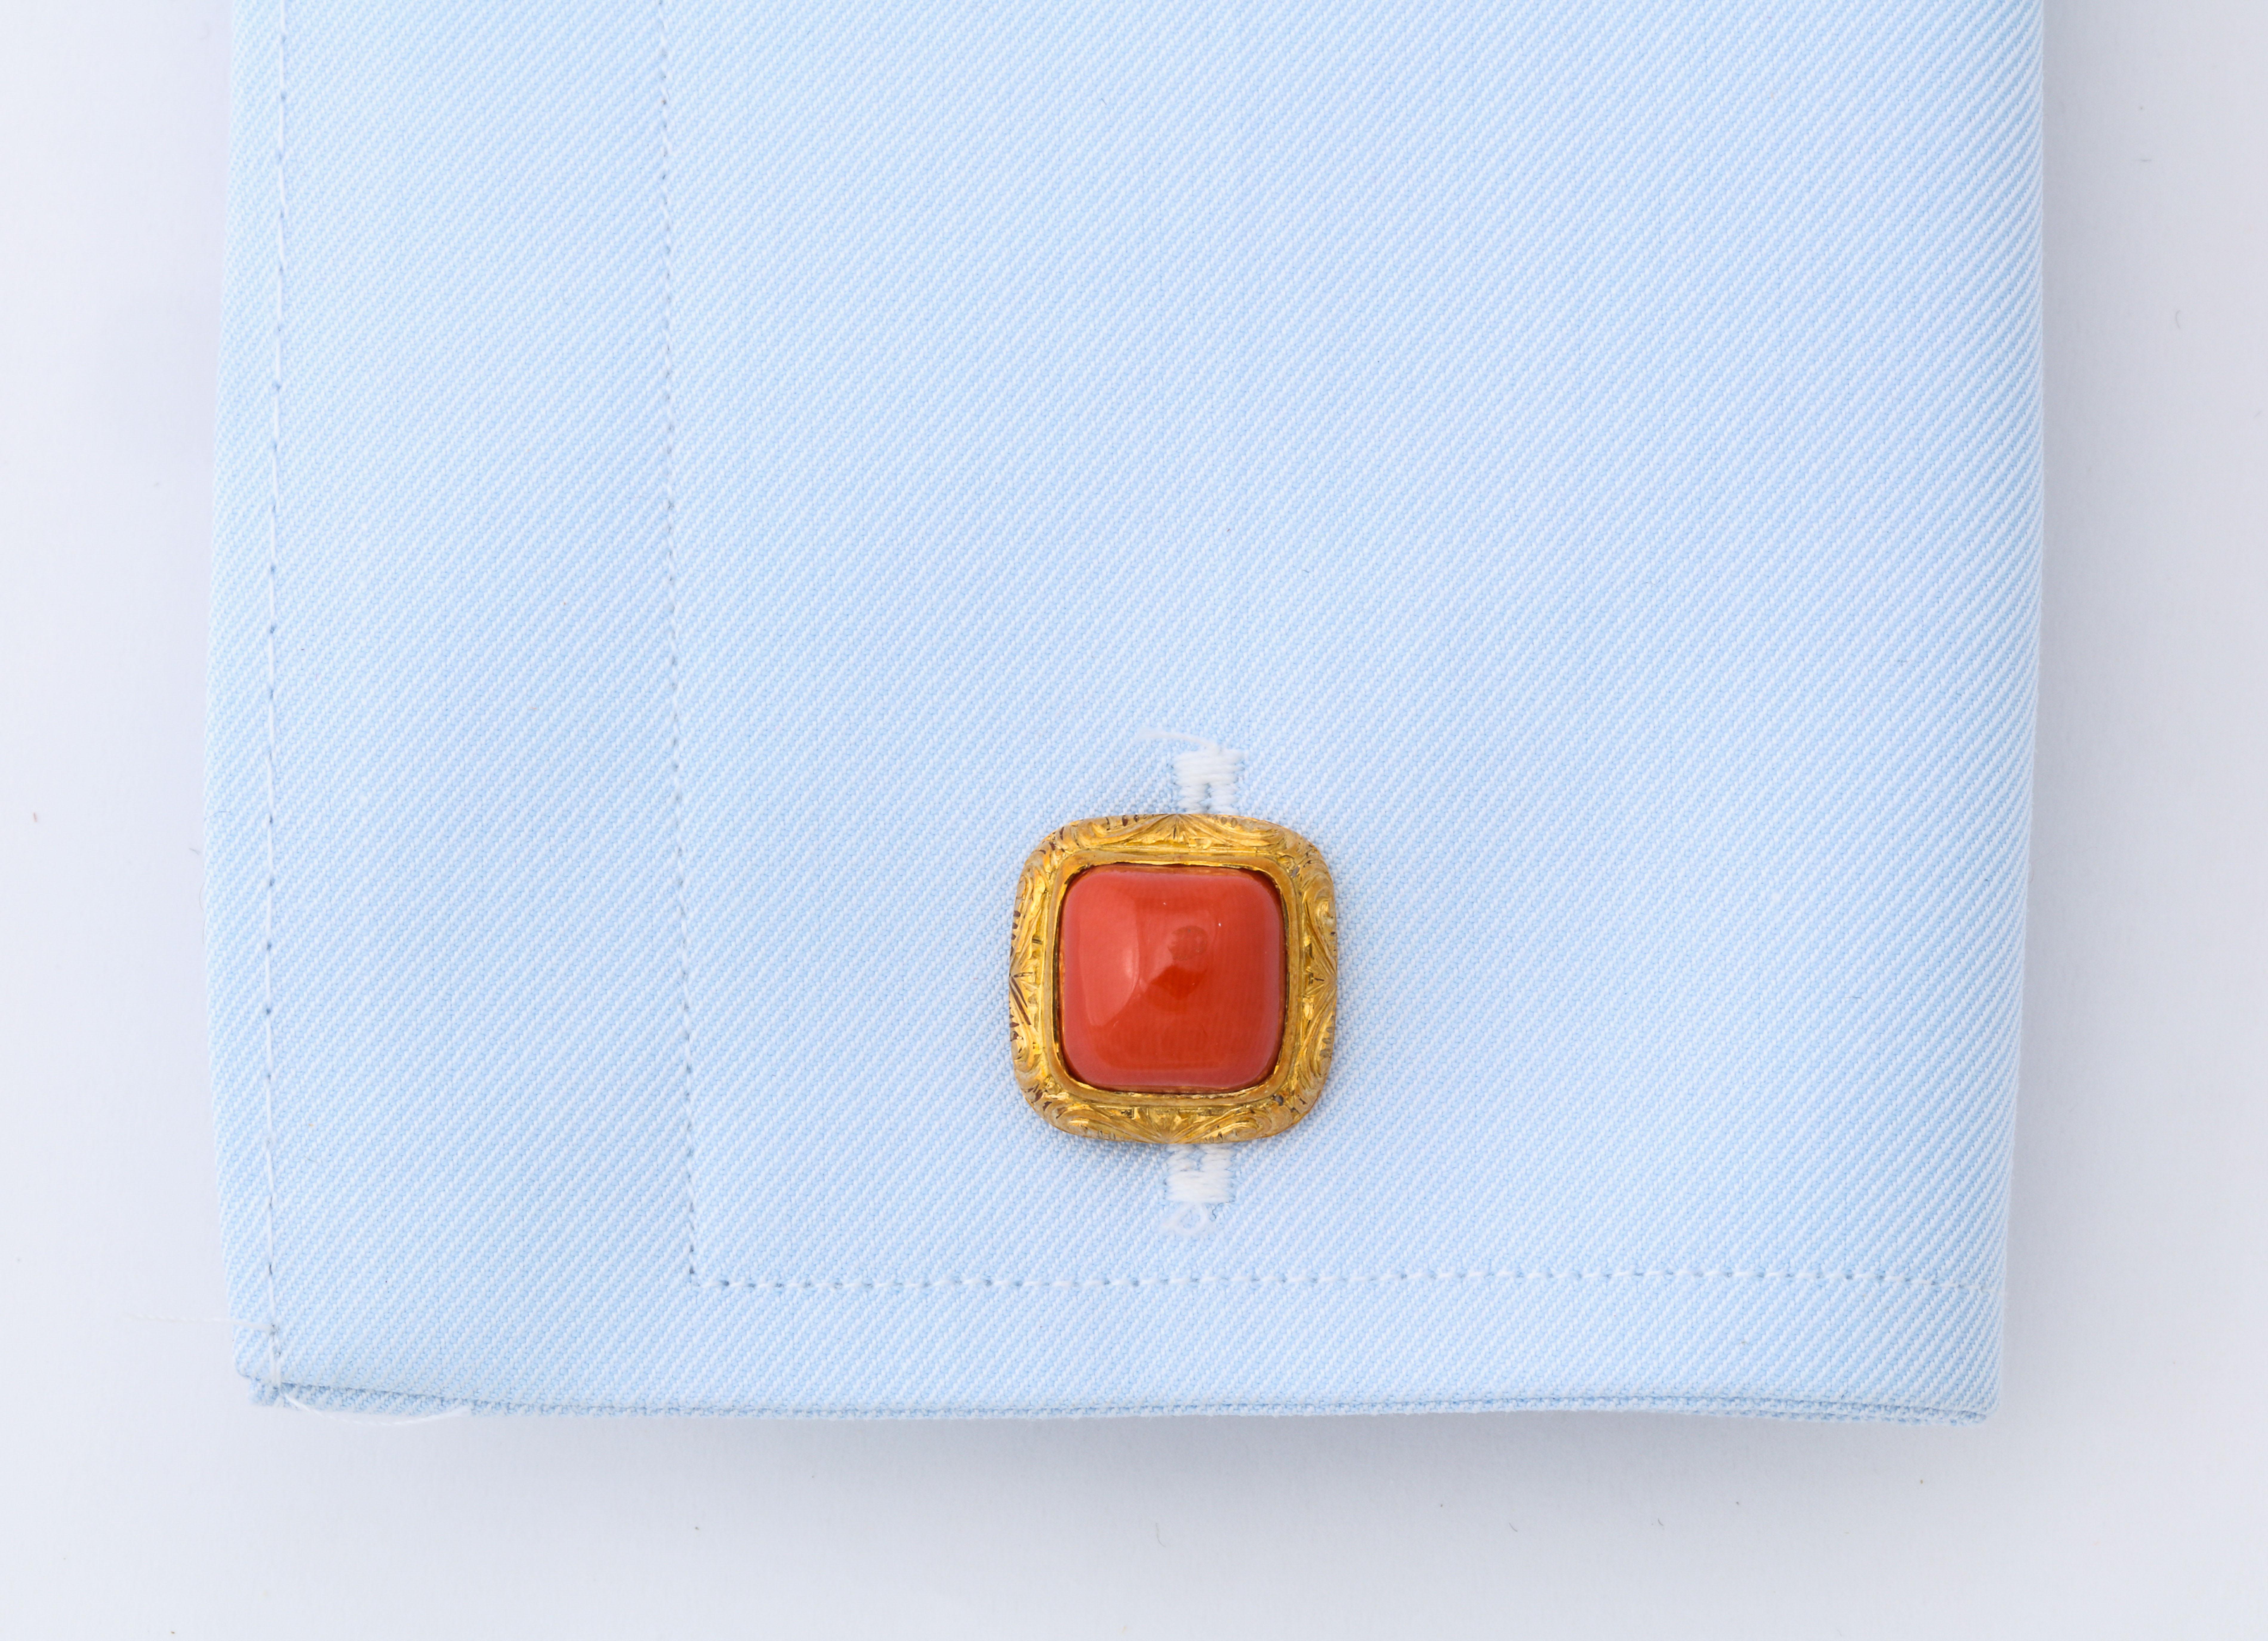 Very fine hand engraved gold cufflinks featuring four perfectly matched pieces of Sardinian coral.  Double sided cufflinks are a sign of true luxury and the exceptional hand engraving makes all the difference.  
Made in Italy.